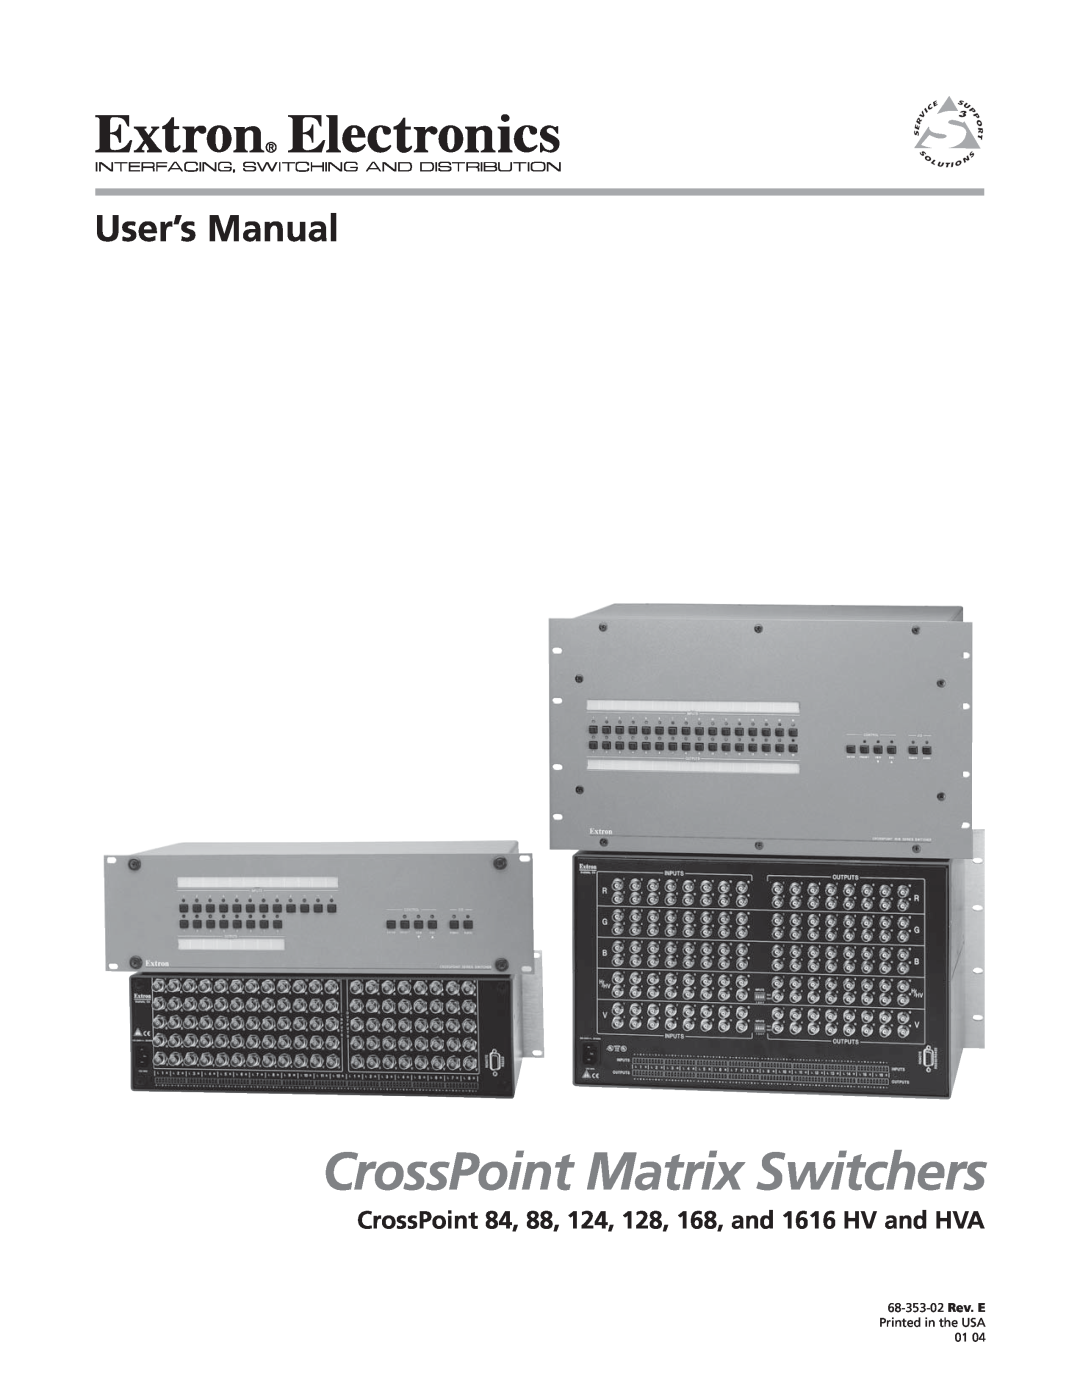 Extron electronic CrossPoint 168 manual CrossPoint 84, 88, 124, 128, 168, and 1616 HV and HVA, CrossPoint Matrix Switchers 